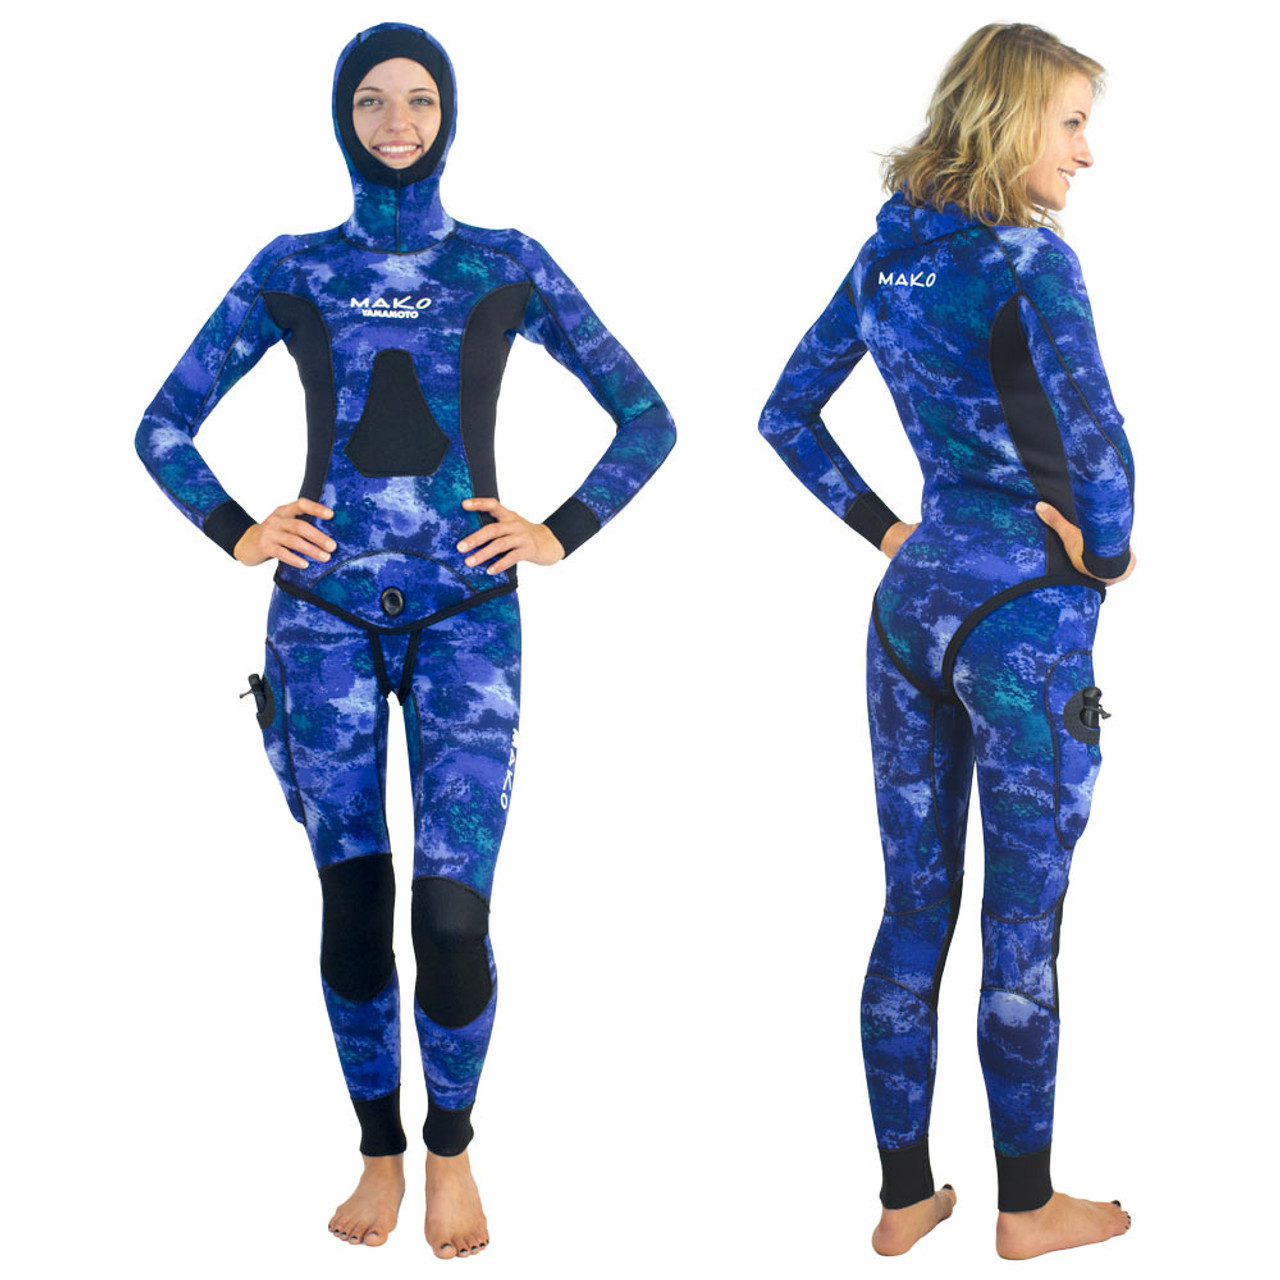 https://cdn11.bigcommerce.com/s-2buyus9w3z/images/stencil/1280x1280/products/395/915/3D-womensoceanbluefull-wetsuit__23583.1626736301.jpg?c=1